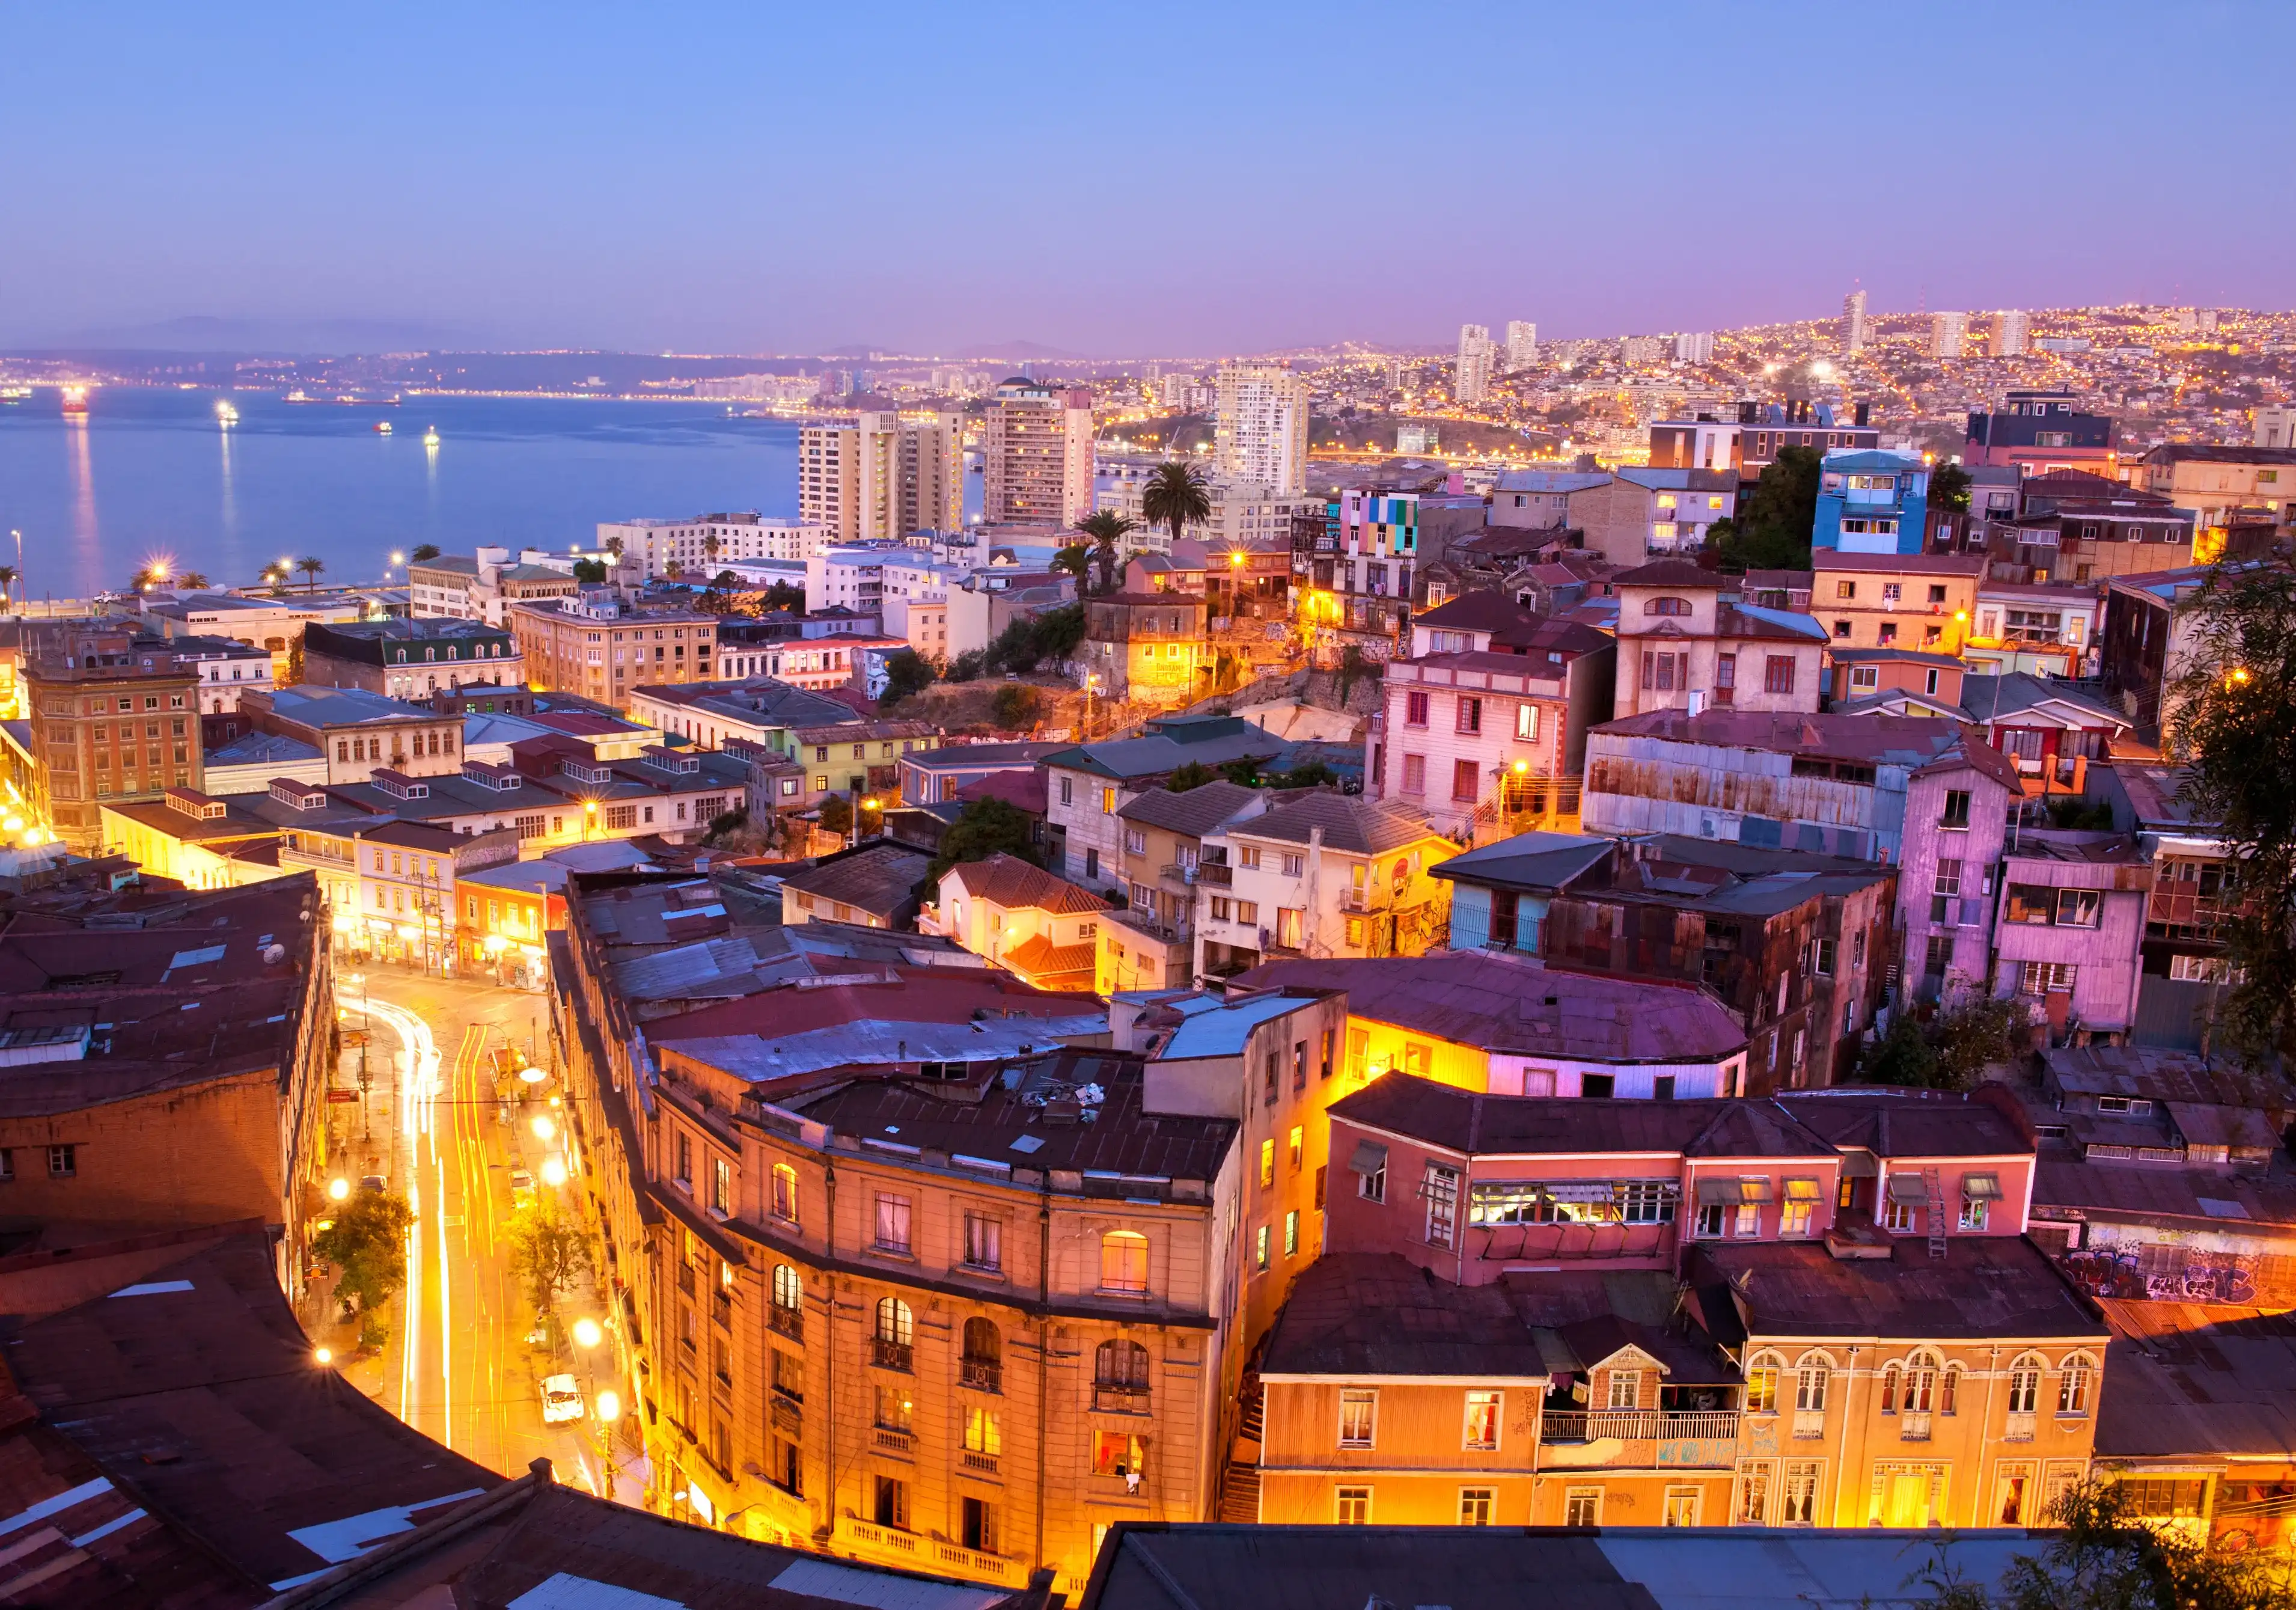 the historic quarter of Valparaiso, declared a UNESCO World Heritage Site in 2003, by night.